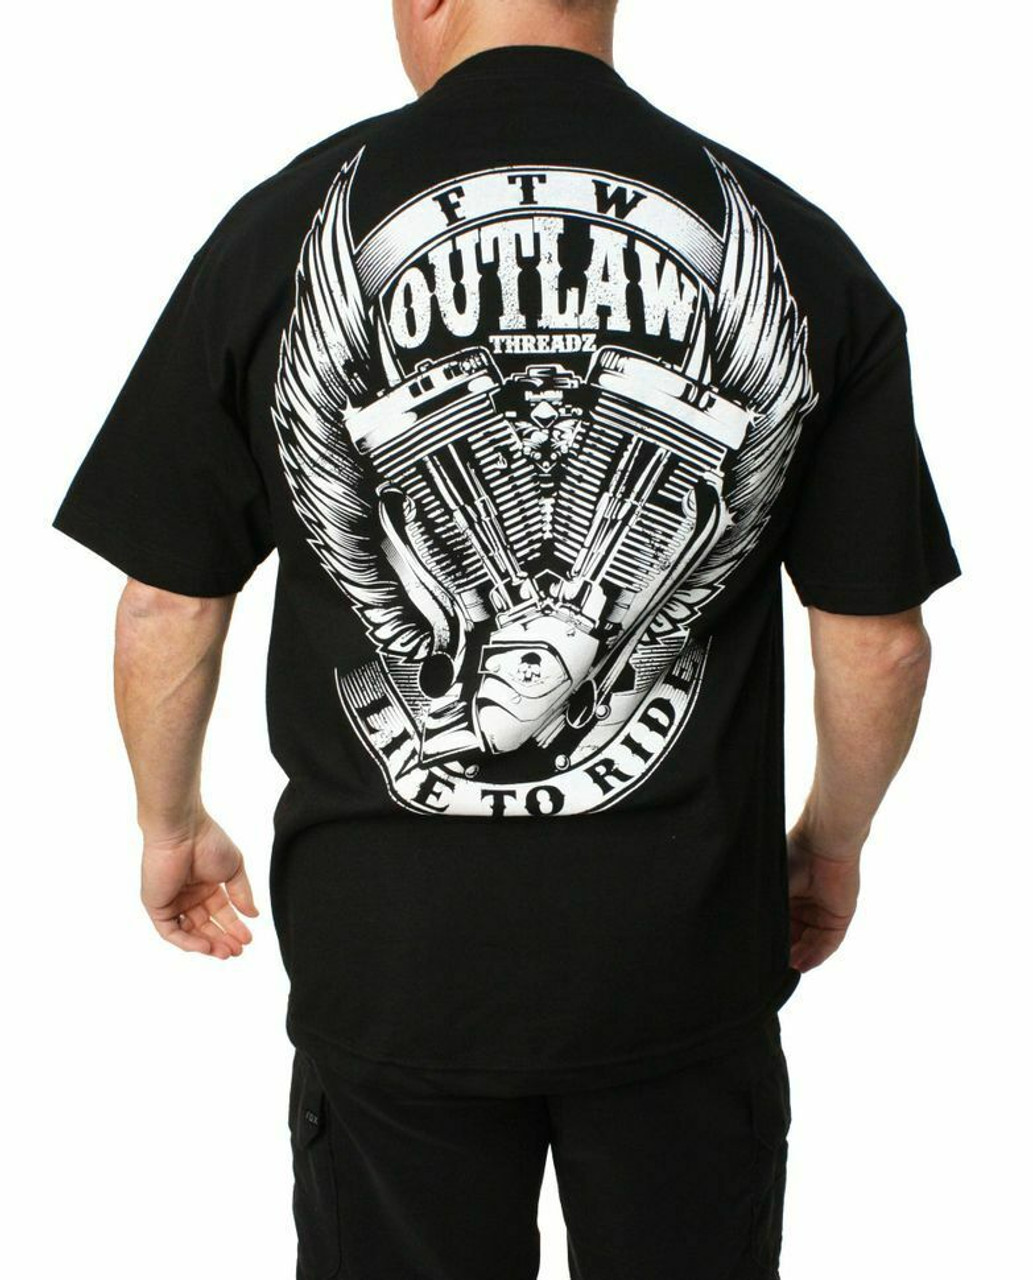 Outlaw Threadz Live to Ride Motorcycle Engine Wings Biker FTW T Shirt ...